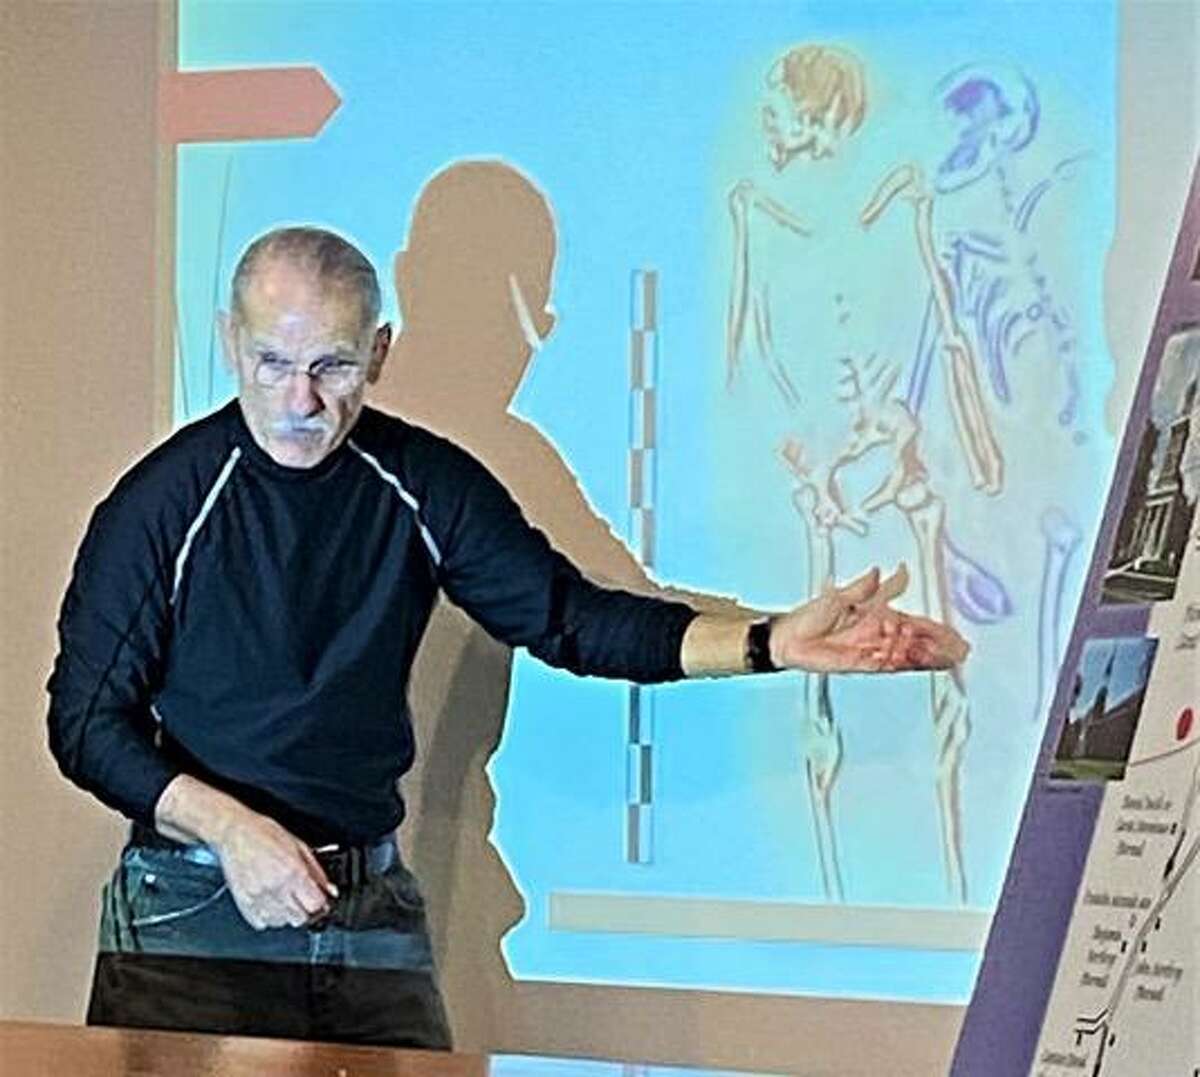 Nicholas Bellantoni, emeritus state archaeologist, discussed the skeletons linked to the Battle of Ridgefield at press conference last December.